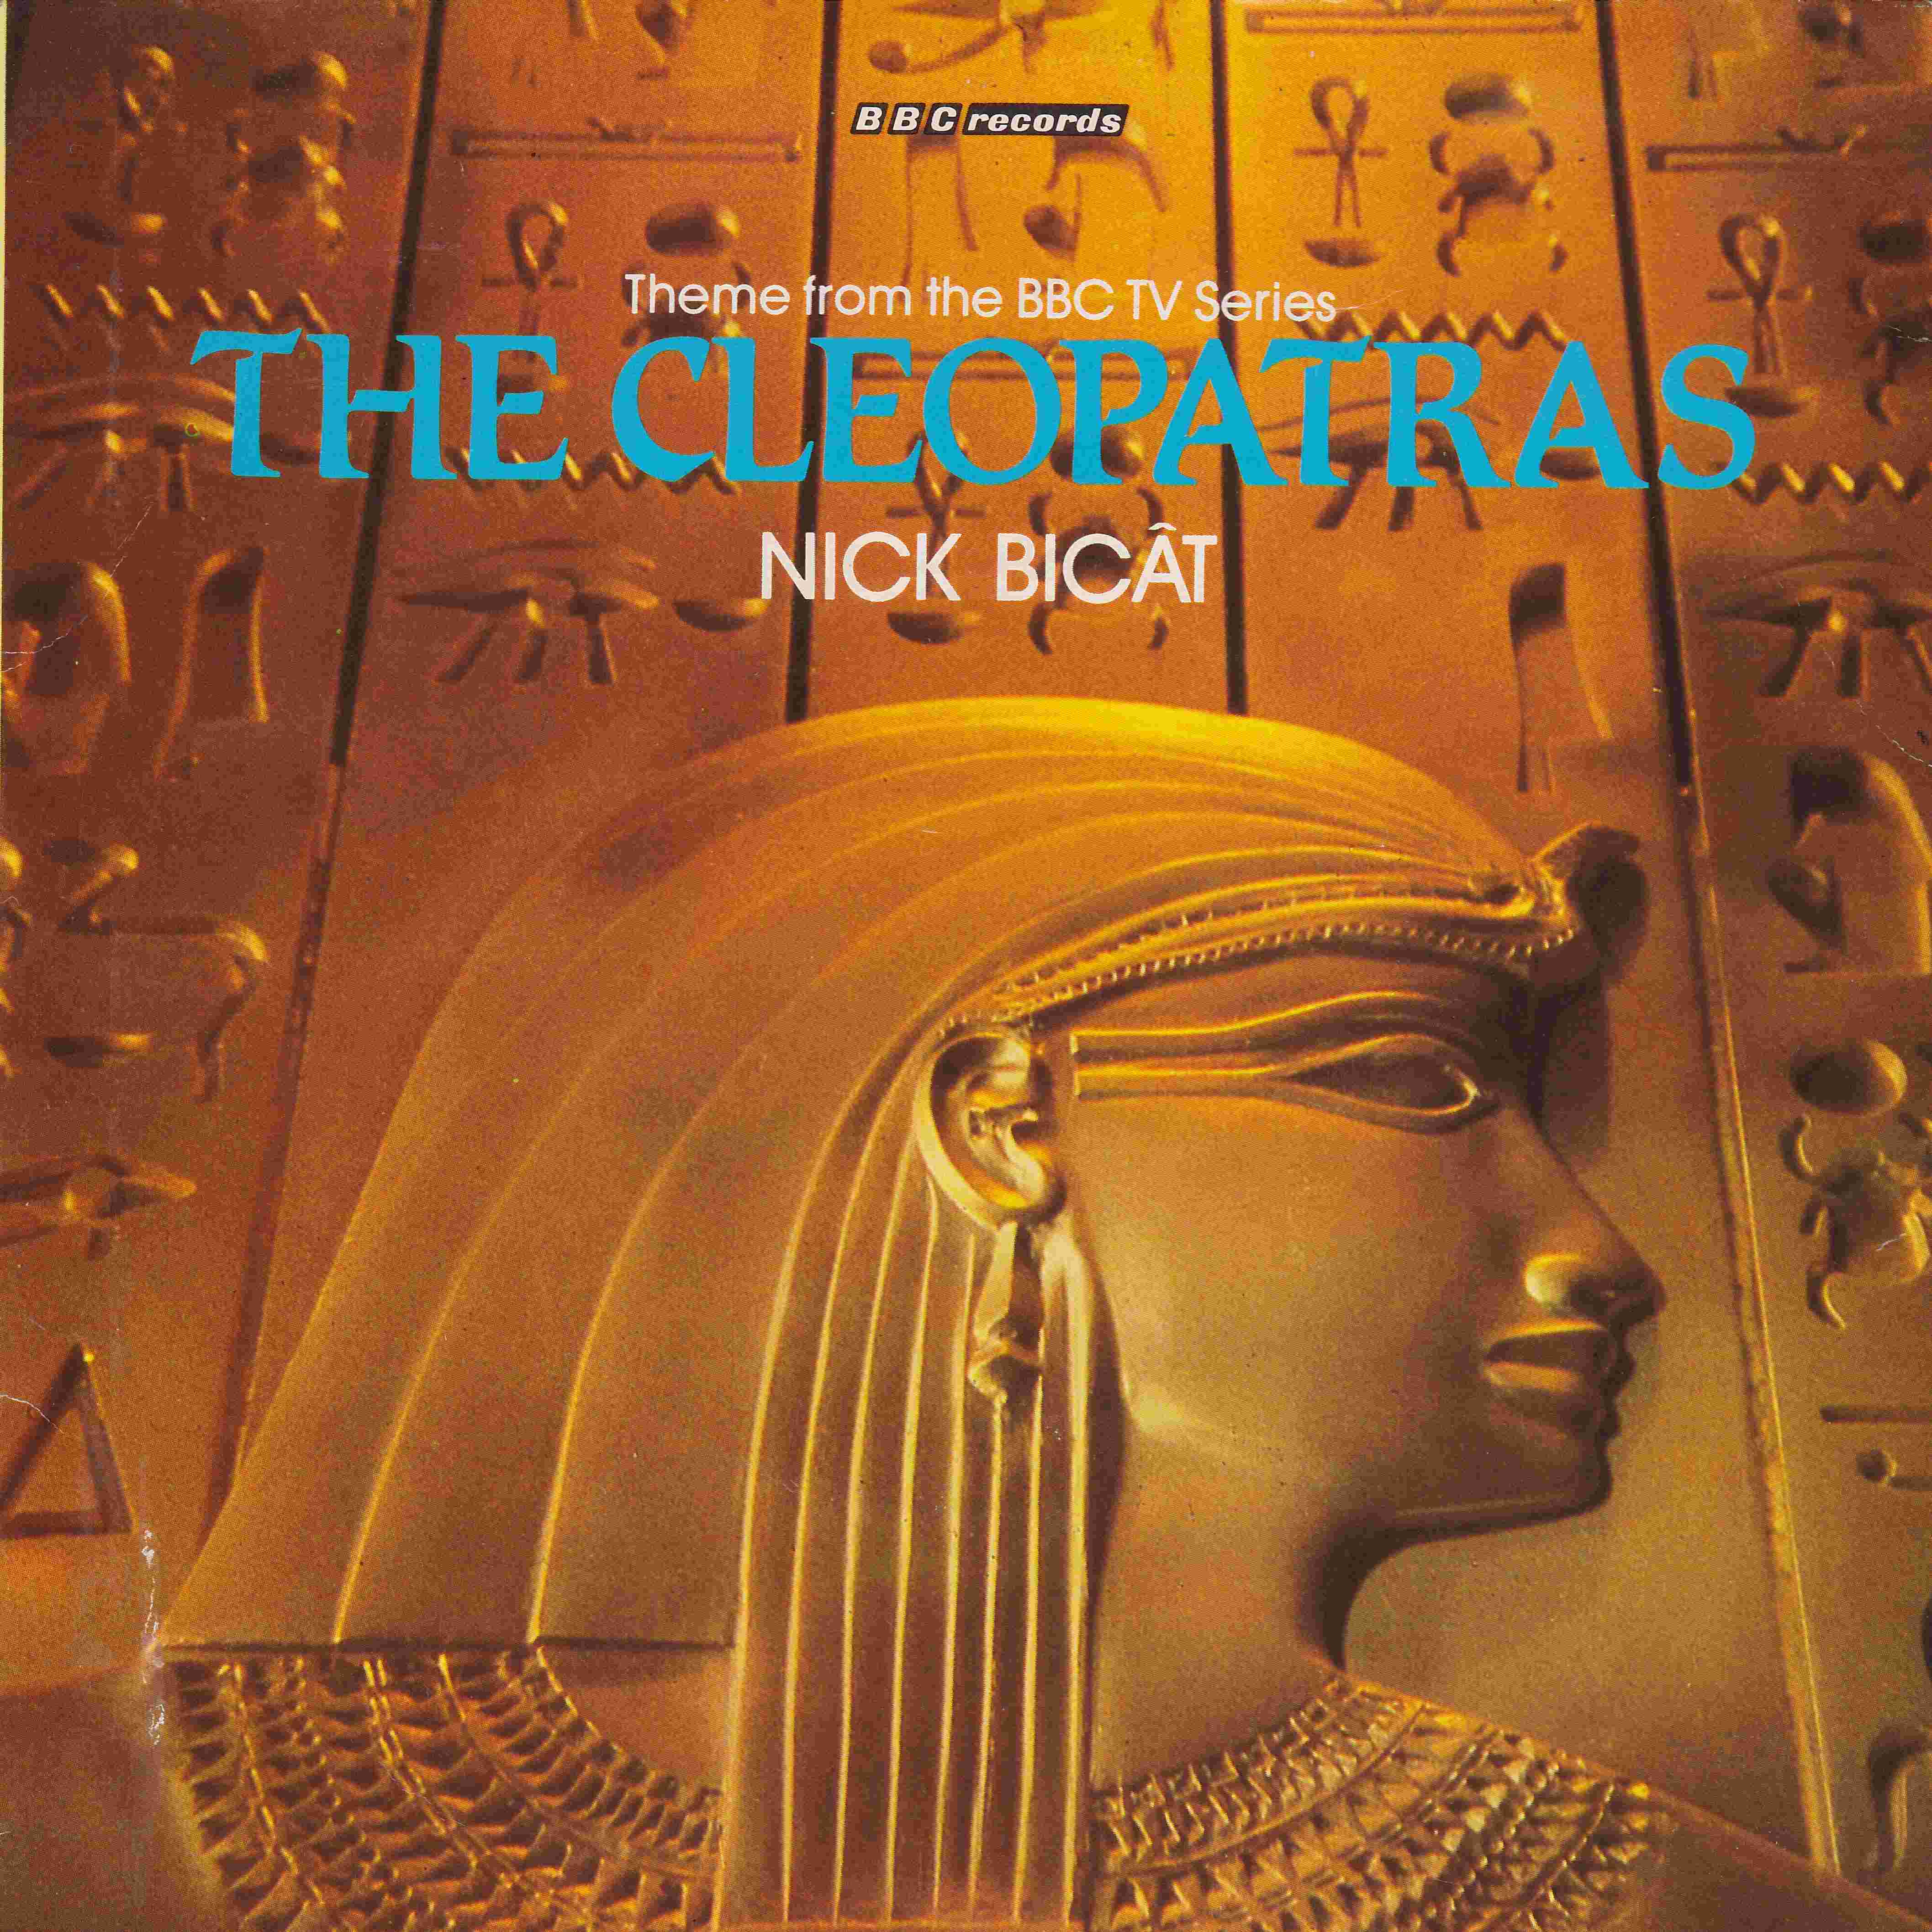 Picture of RESL 128 The Cleopatras by artist Nick Bicat from the BBC records and Tapes library